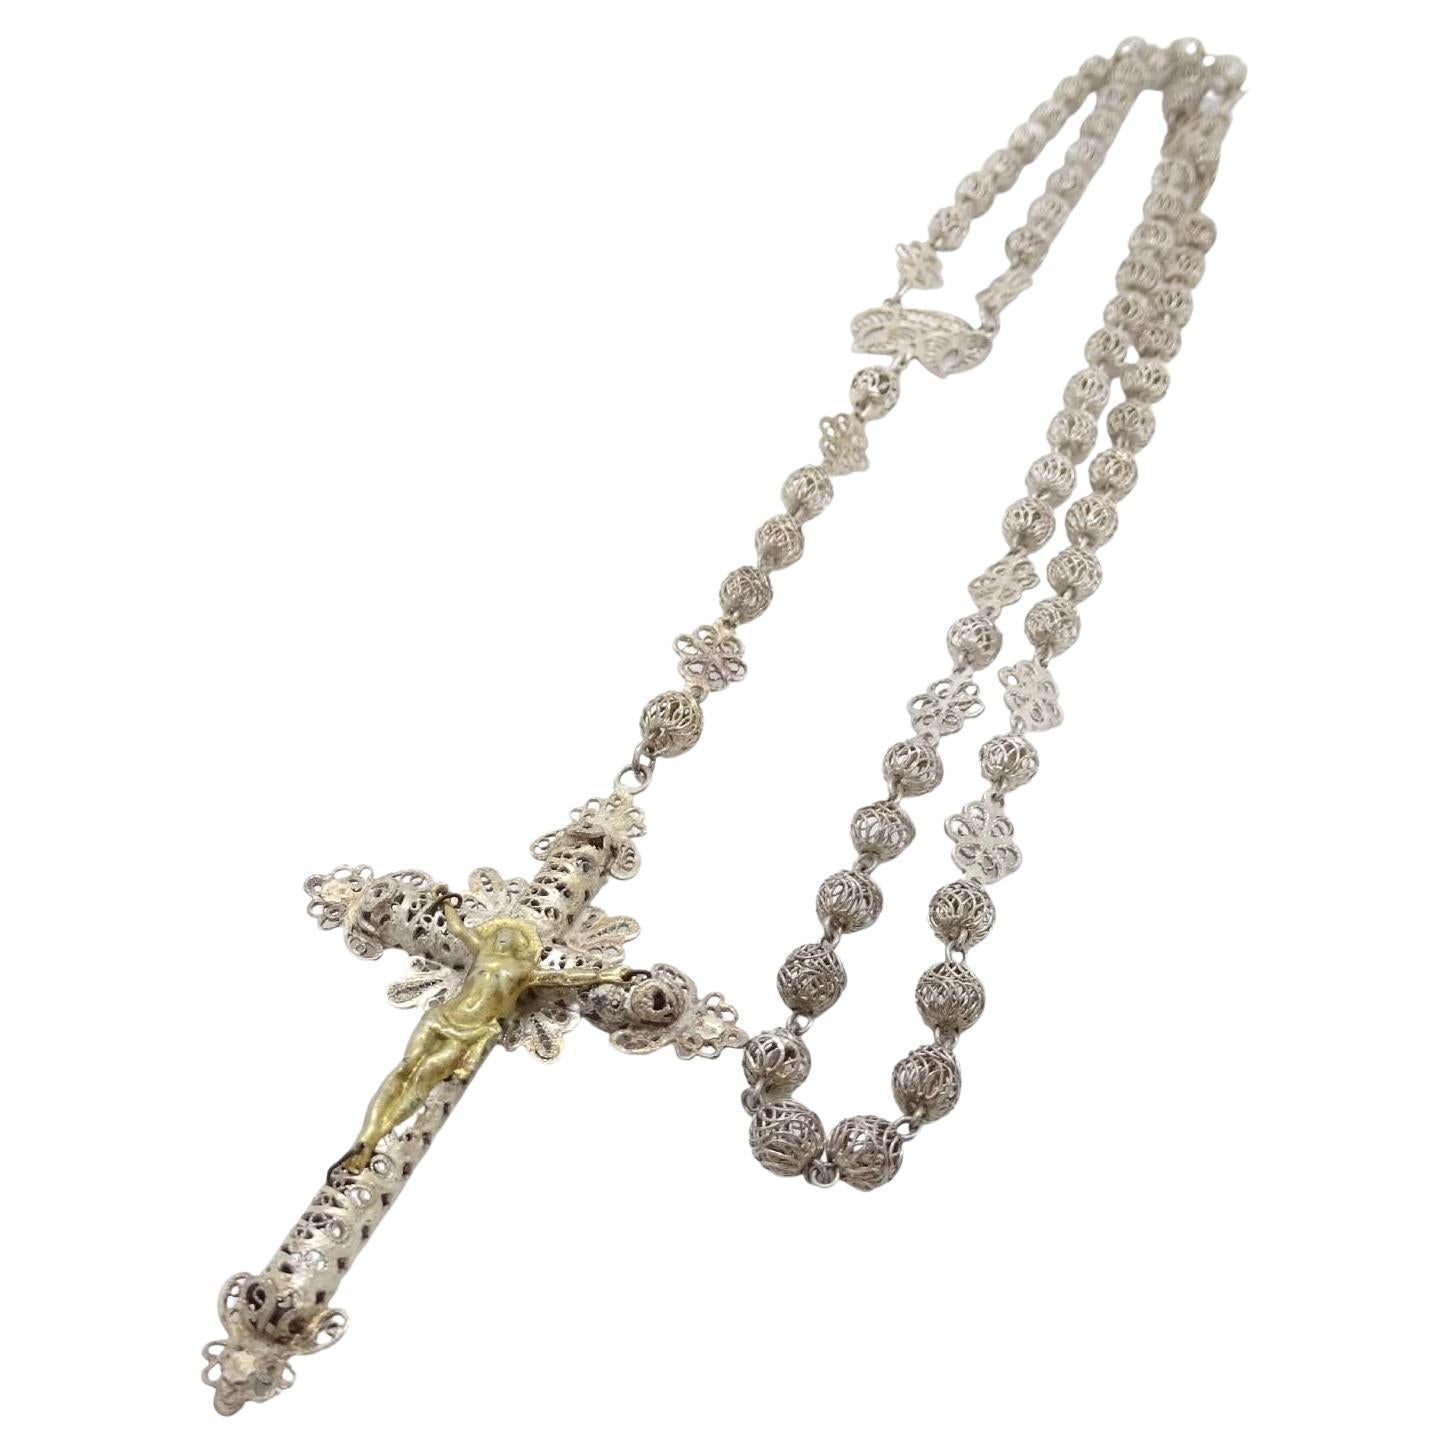 Spanish rosary in gold-plated silver filigree gilded silver cross